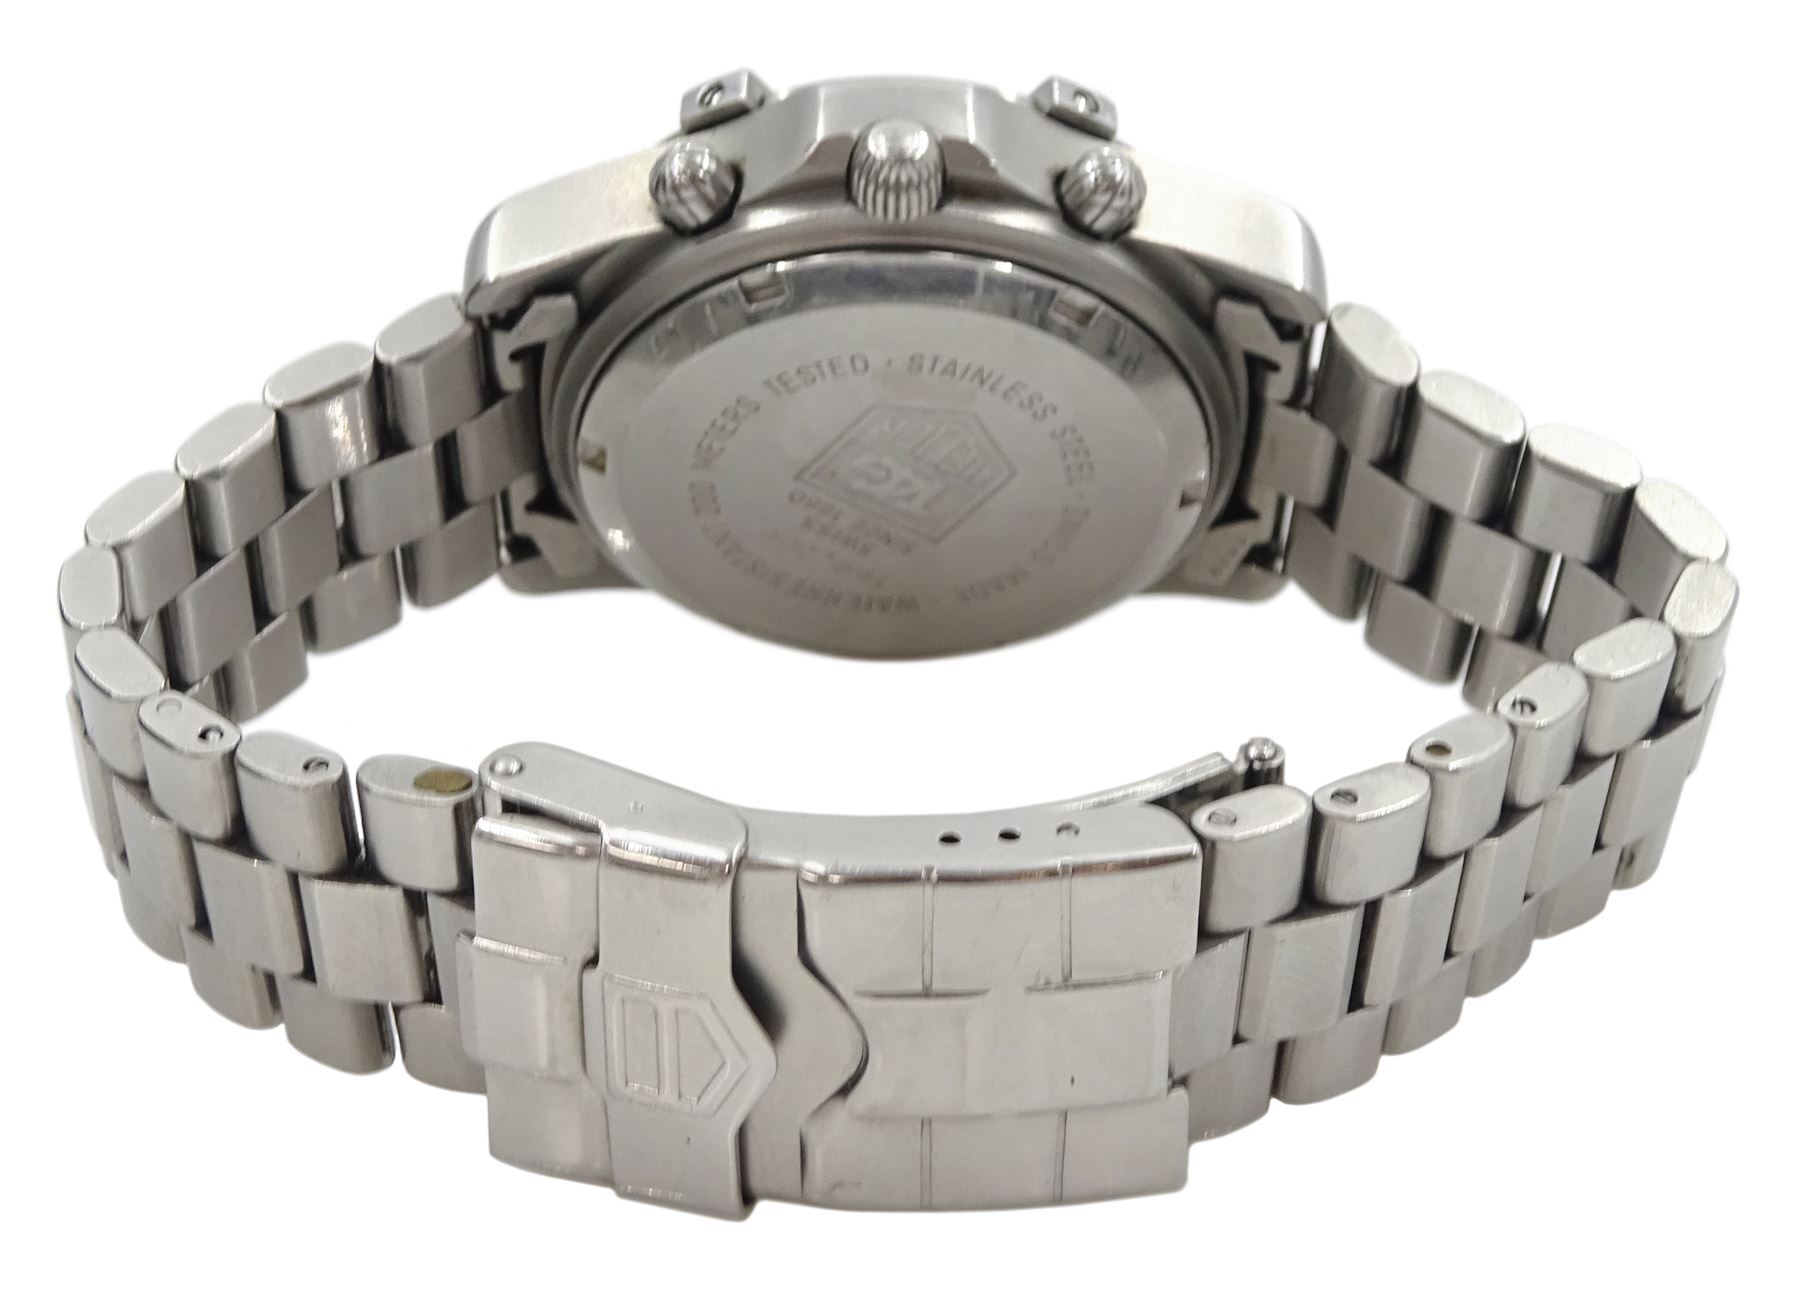 Tag Heuer 2000 gentleman's stainless steel automatic chronograph wristwatch - Image 3 of 4